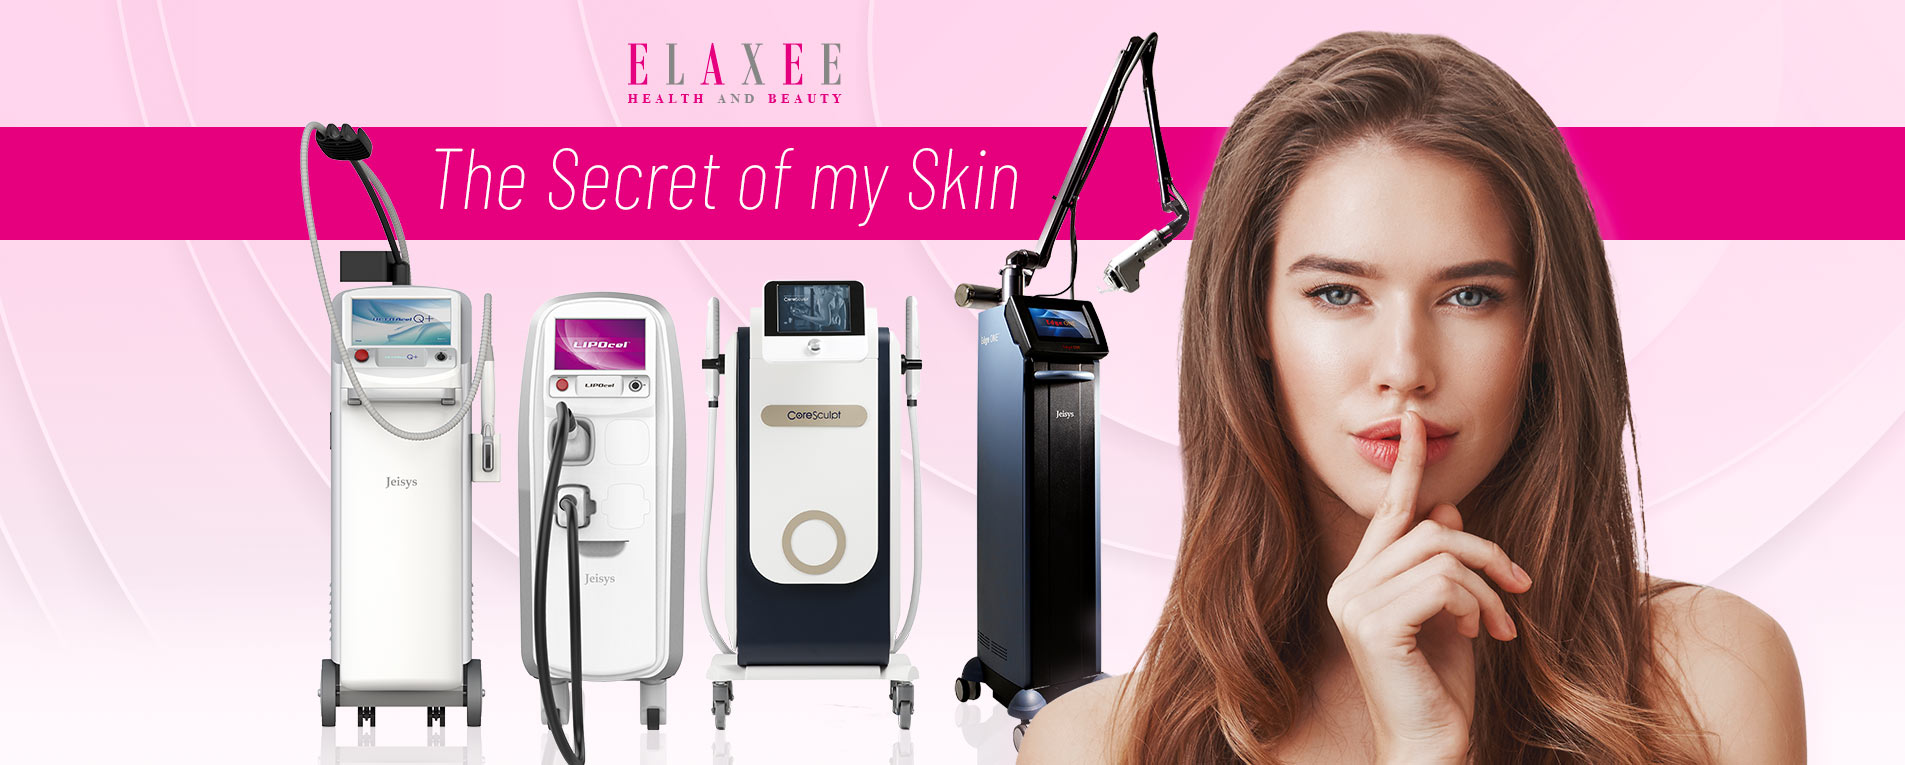 elaxee the secret of my skin